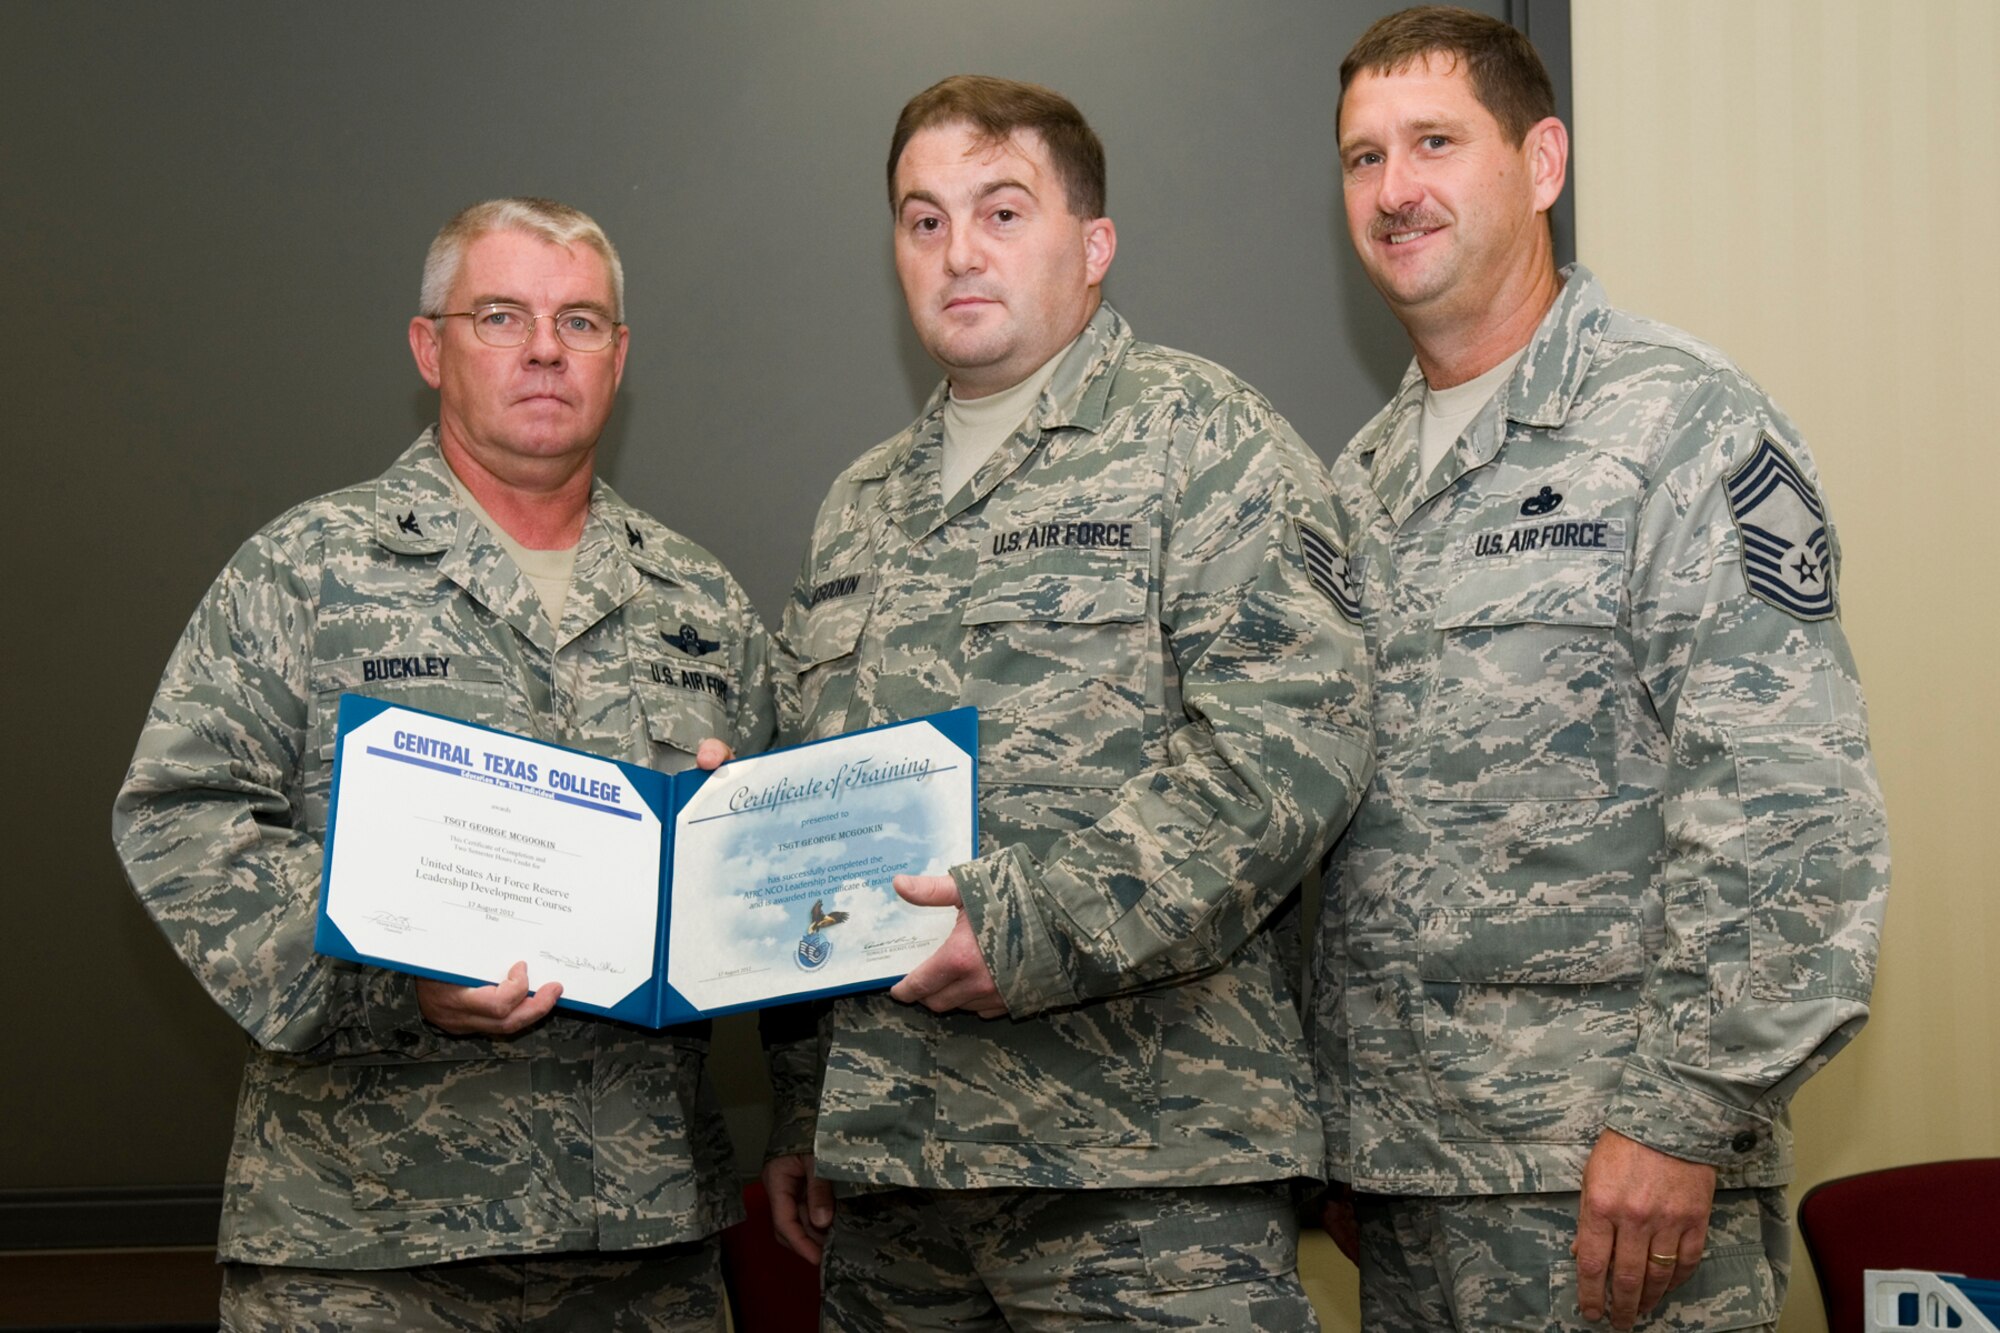 GRISSOM AIR RESERVE BASE, Ind. -- Tech. Sgt. George McGookin, 434th Maintenance Squadron knowledge operations manager, receives a certificate of training from Col. Don Buckley, 434th Air Refueling Wing commander, and Chief Master Sergeant James Burba, 434th Maintenance Operations Flight maintenance superintendent, at a graduation ceremony for a Non-Commissioned Officer Leadership Development Course here Aug. 17. McGookin graduated the course with 20 other NCOs. (U.S. Air Force photo/Senior Airman Andrew McLaughlin)